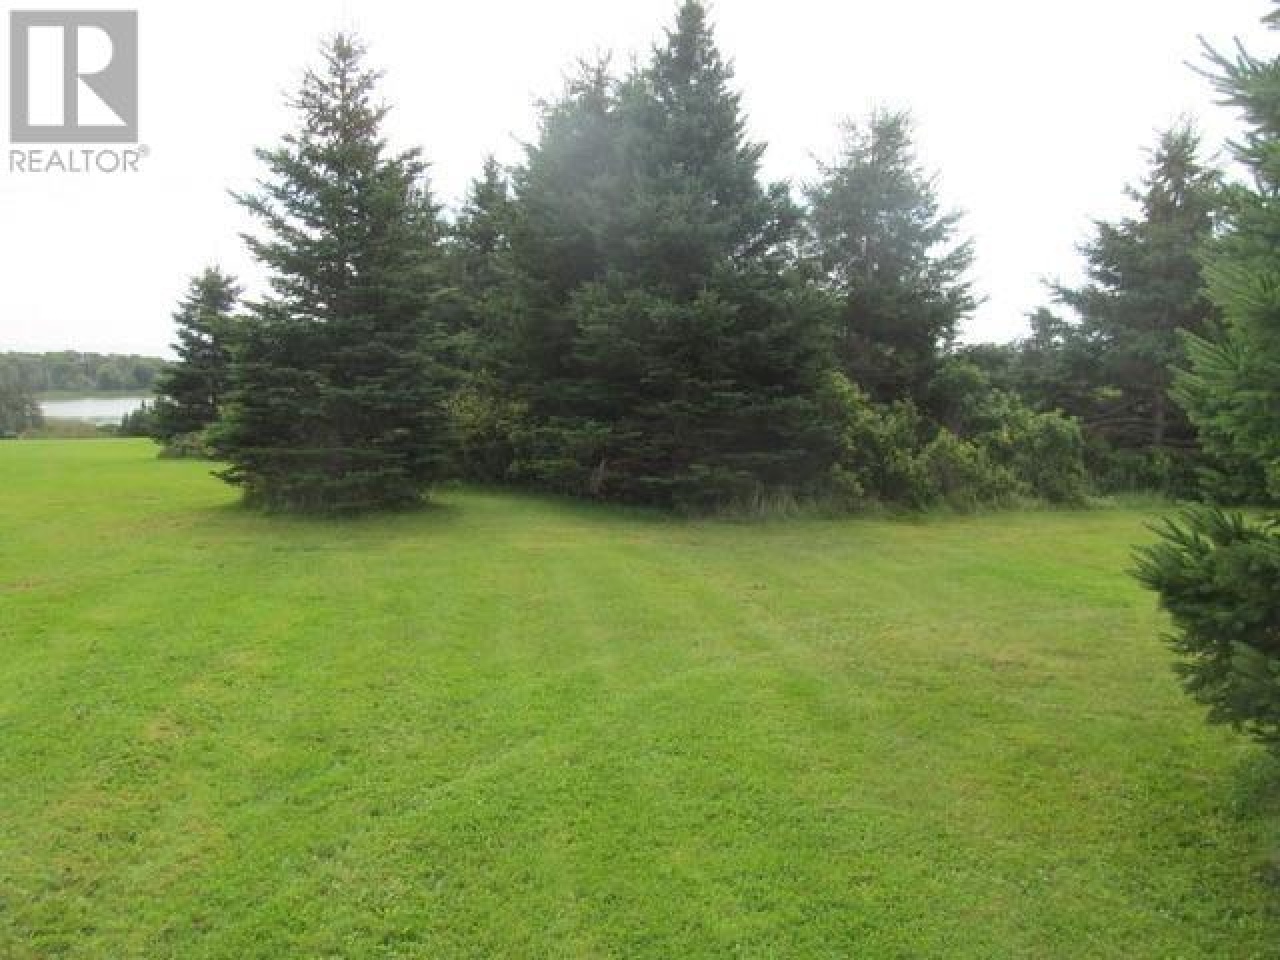 Lot Red PointLot Red Point, Red Point, Prince Edward Island C0A2B0, ,Vacant Land,For Sale,Lot Red Point,202318946